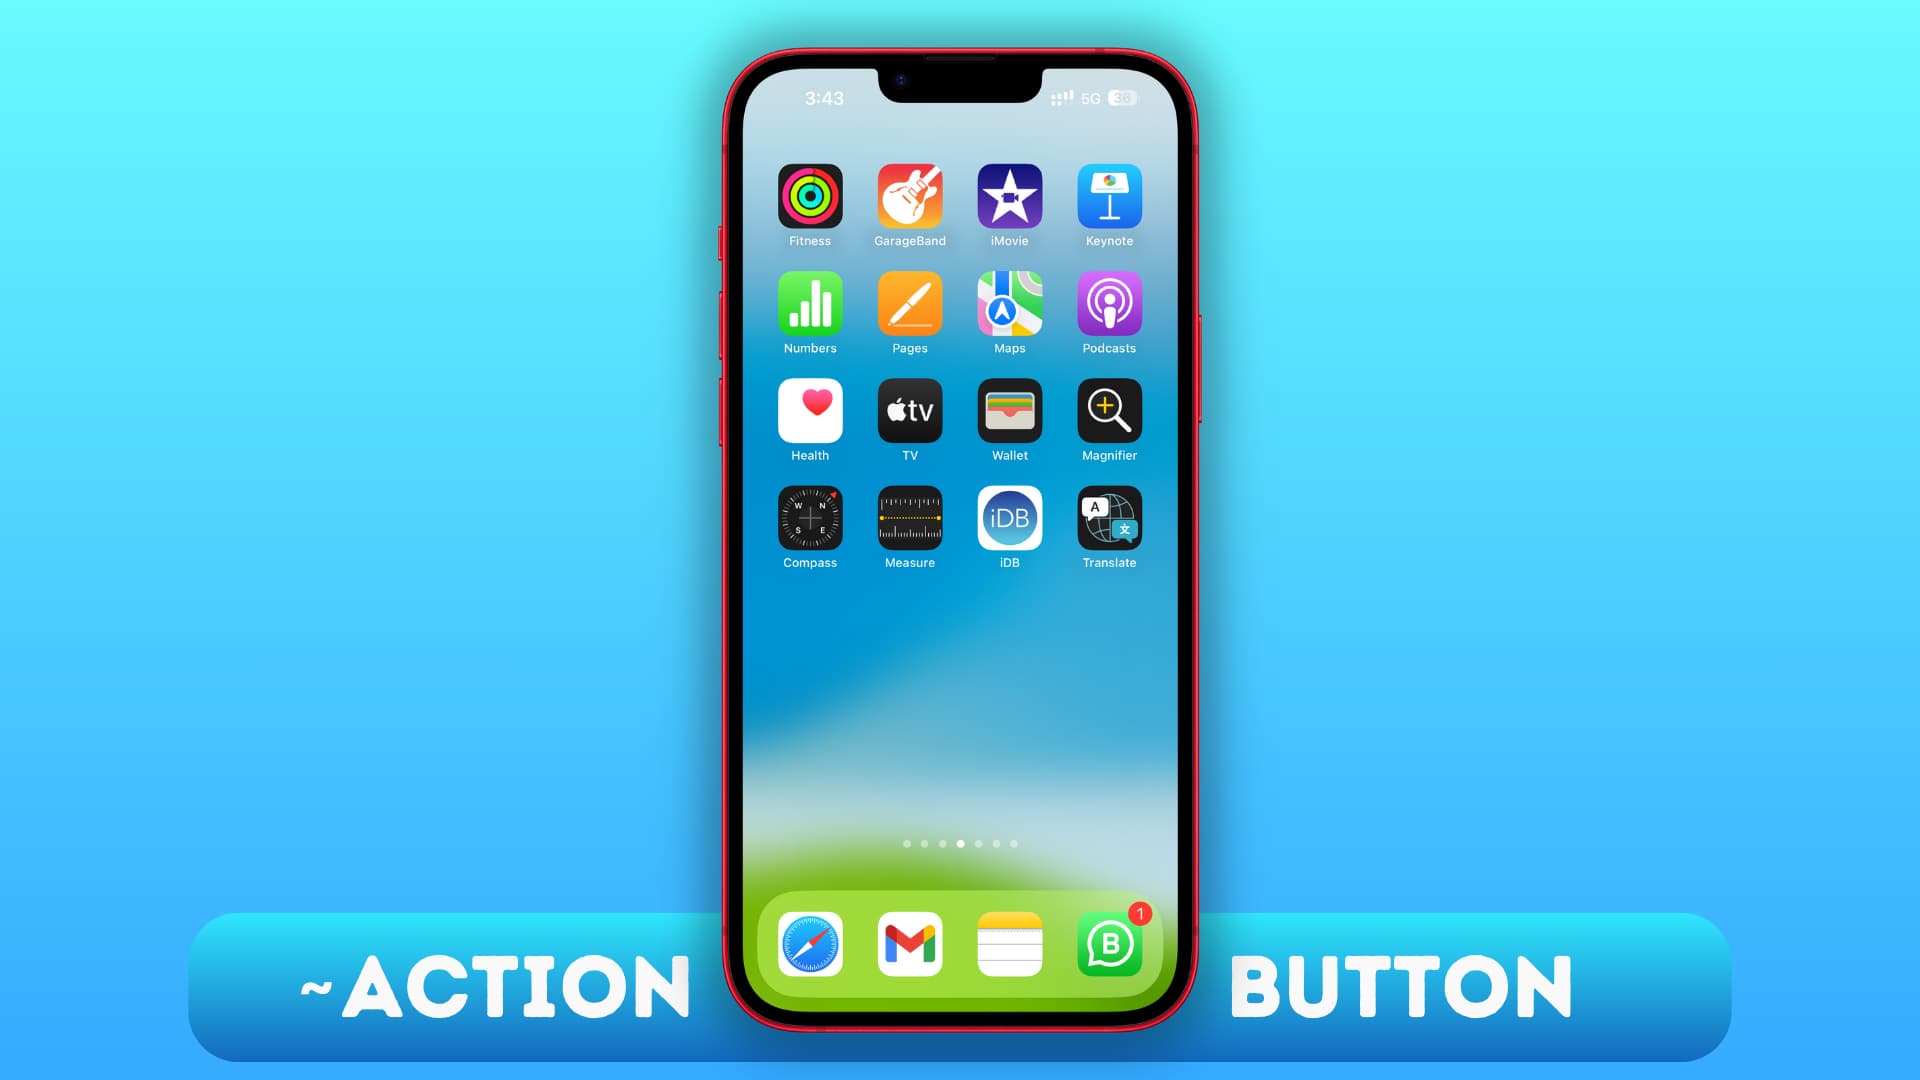 Five ways to replicate the Action button functionality on old iPhones